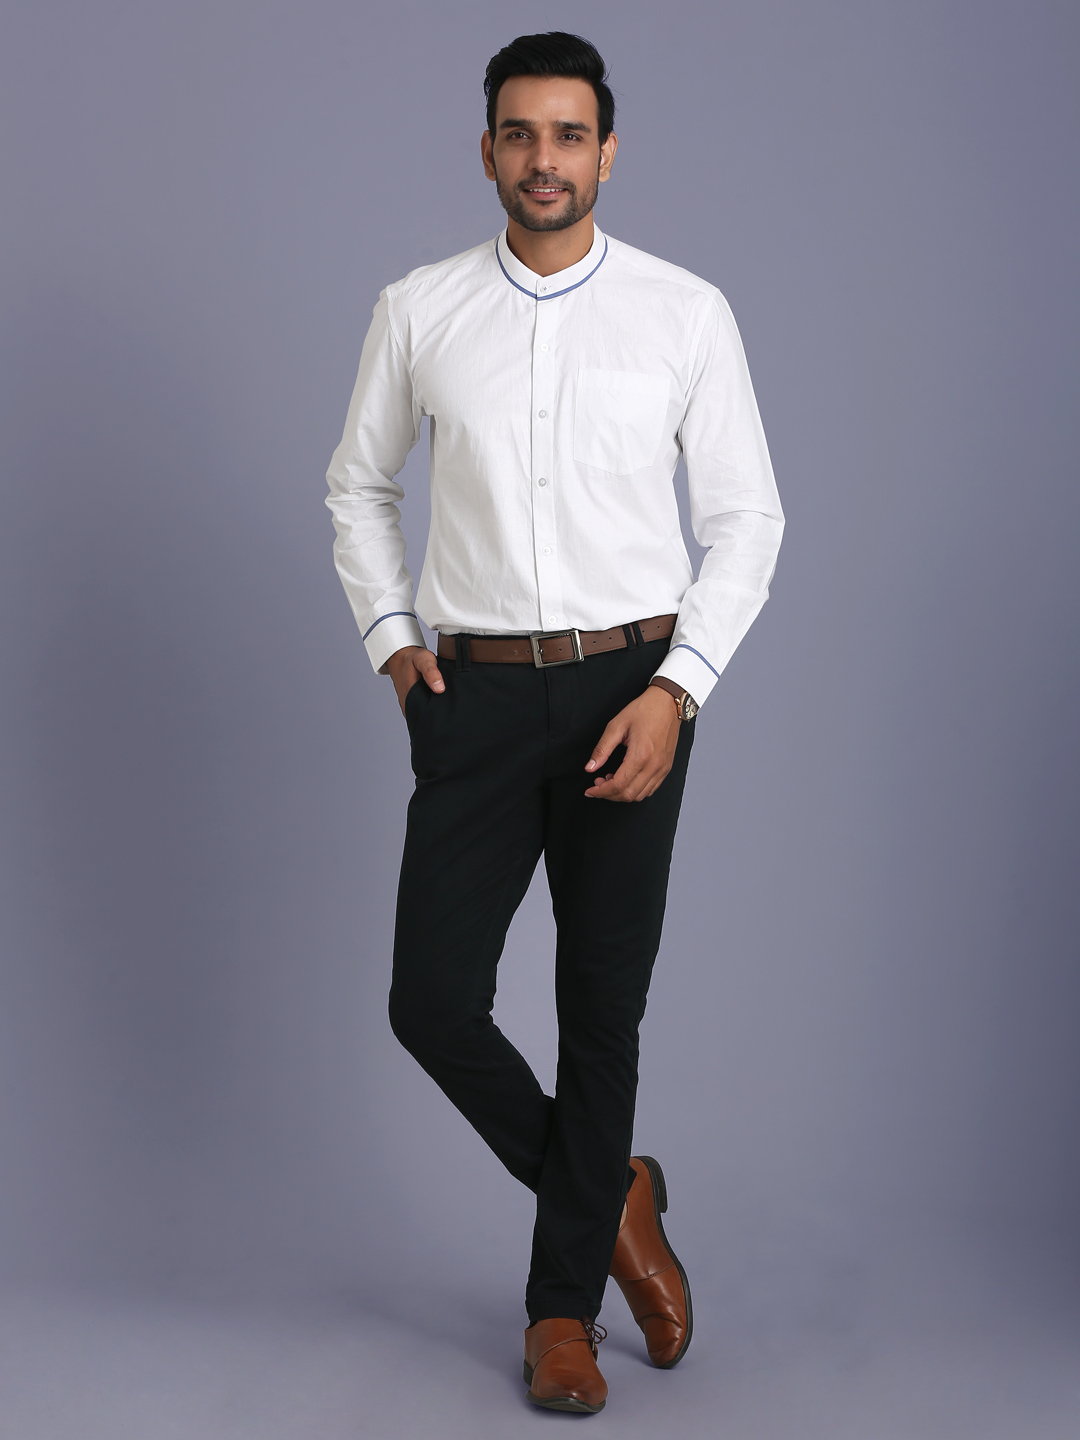 The Perfect Pants and Shirts Combinations for Interviewing | LS Mens  Clothing